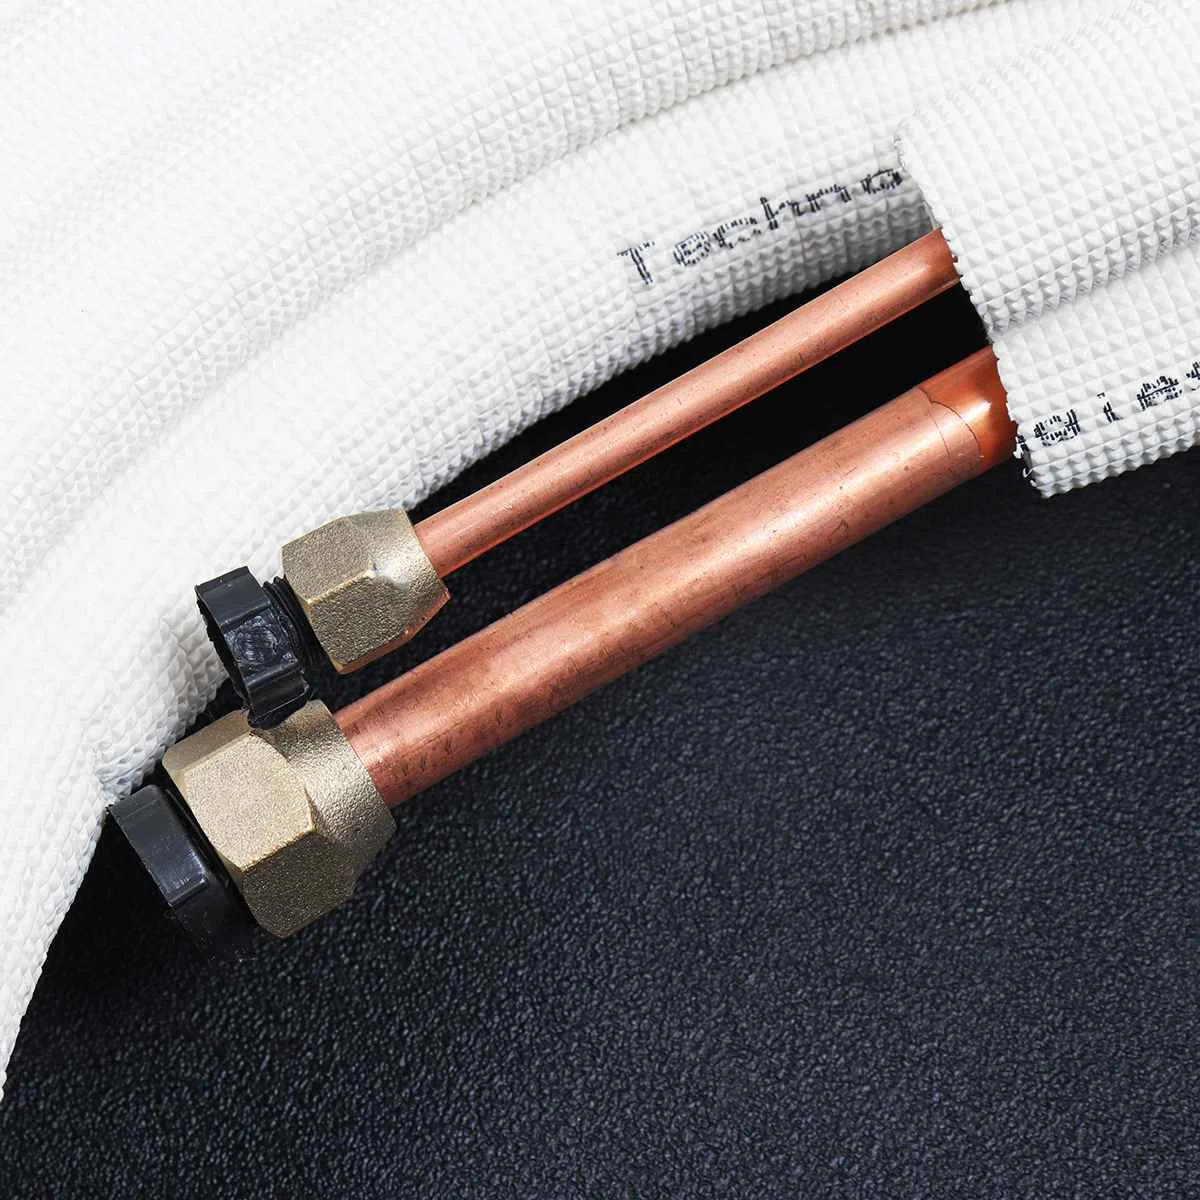 1/4" 1/2" Air Conditioner Pair Coils Tube 5m Flared Insulated Copper Pipes Twin Lines Refrigerant Tube Air Conditioner Parts